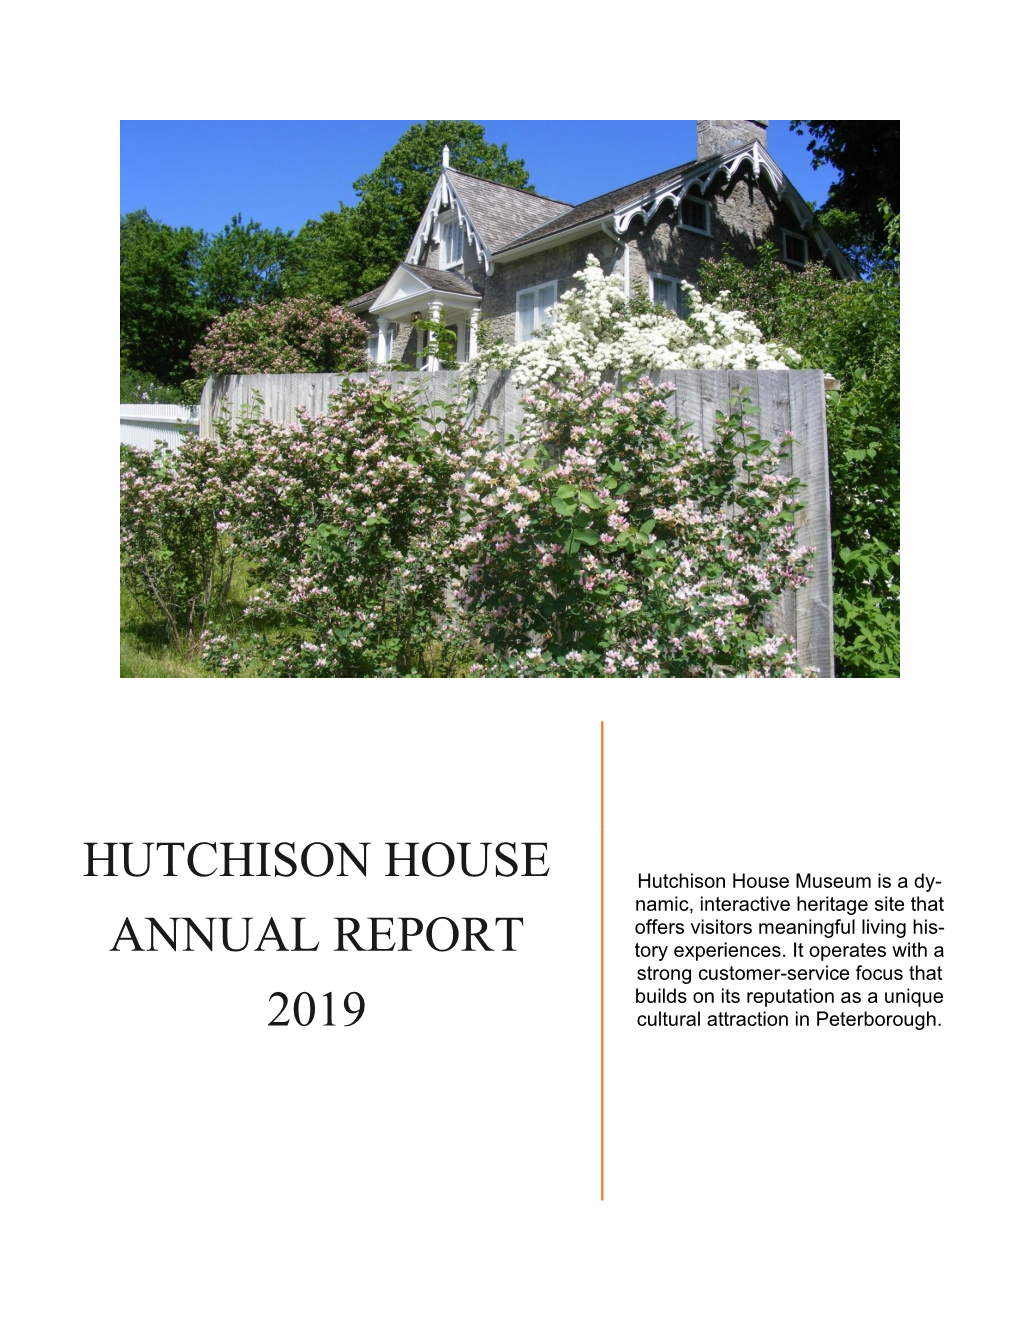 Hutchison House Annual Report 2019